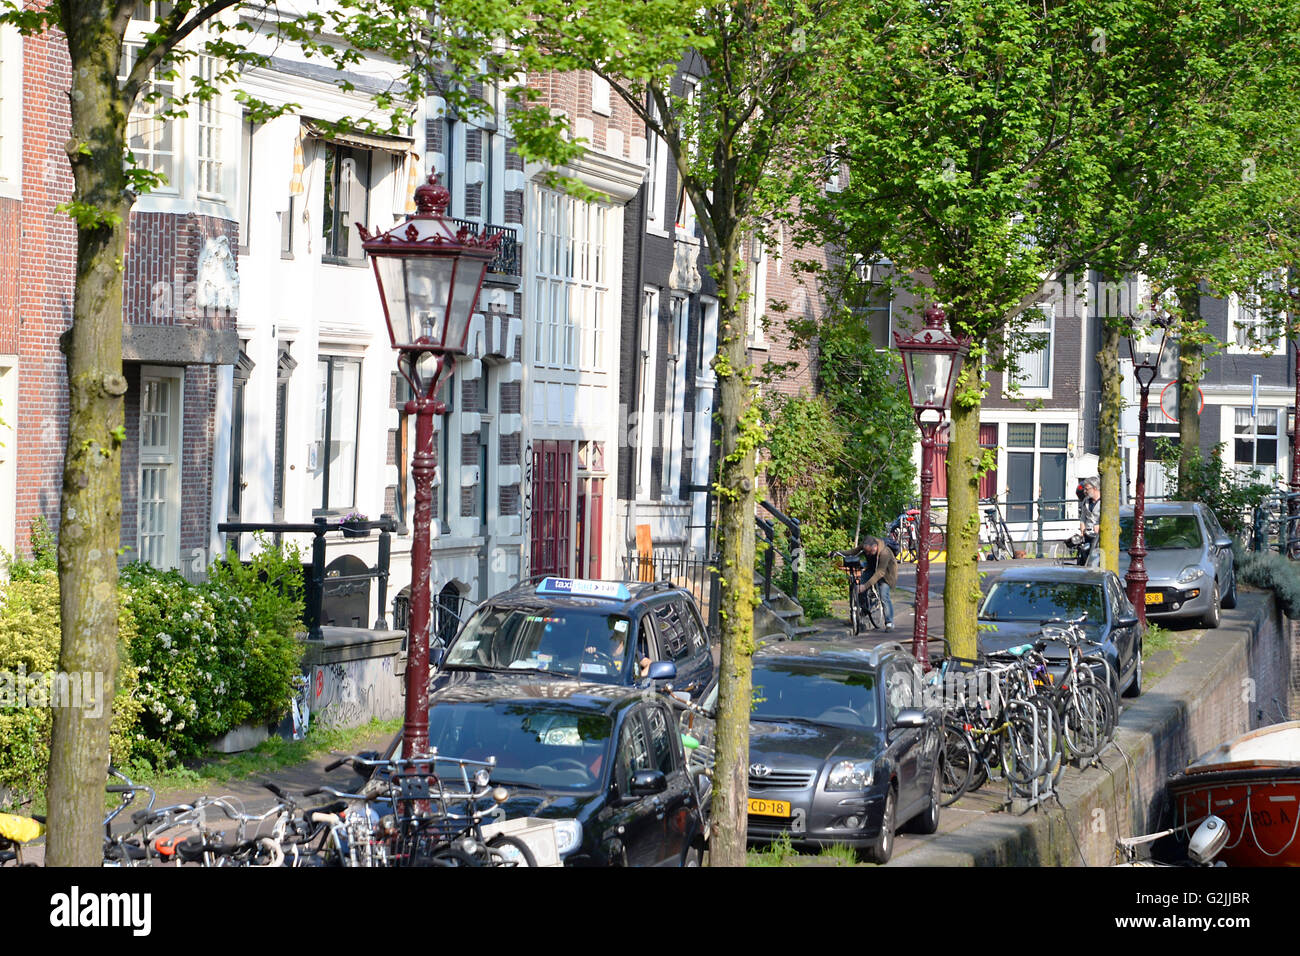 Residential area with parked cars and bikes alongside canal. Stock Photo